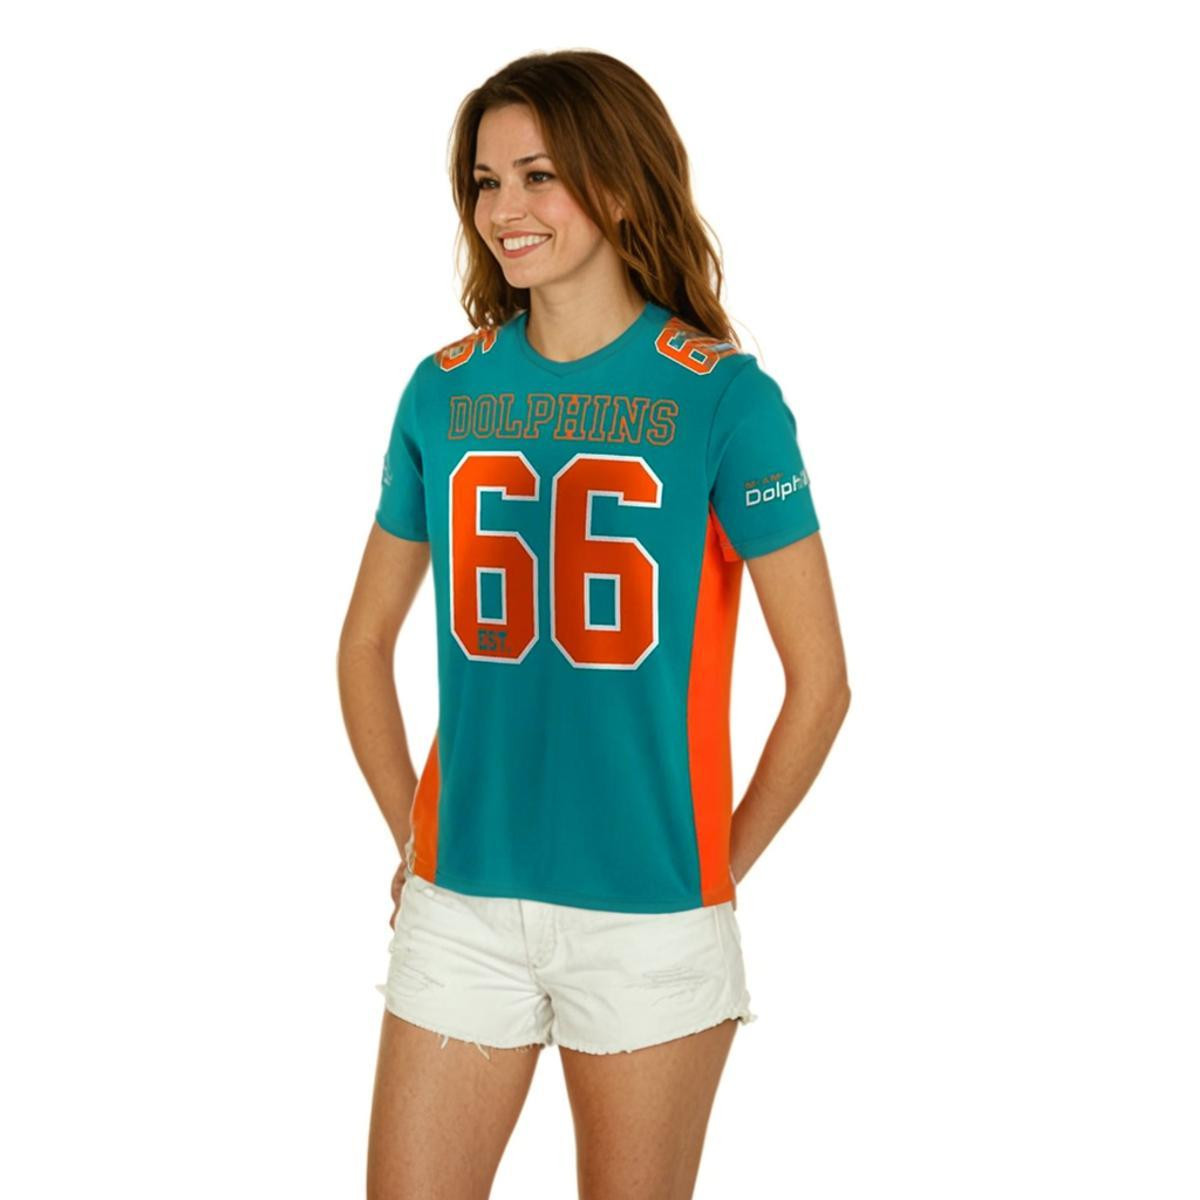 How I style an NFL jersey for football season as a Miami Dolphins